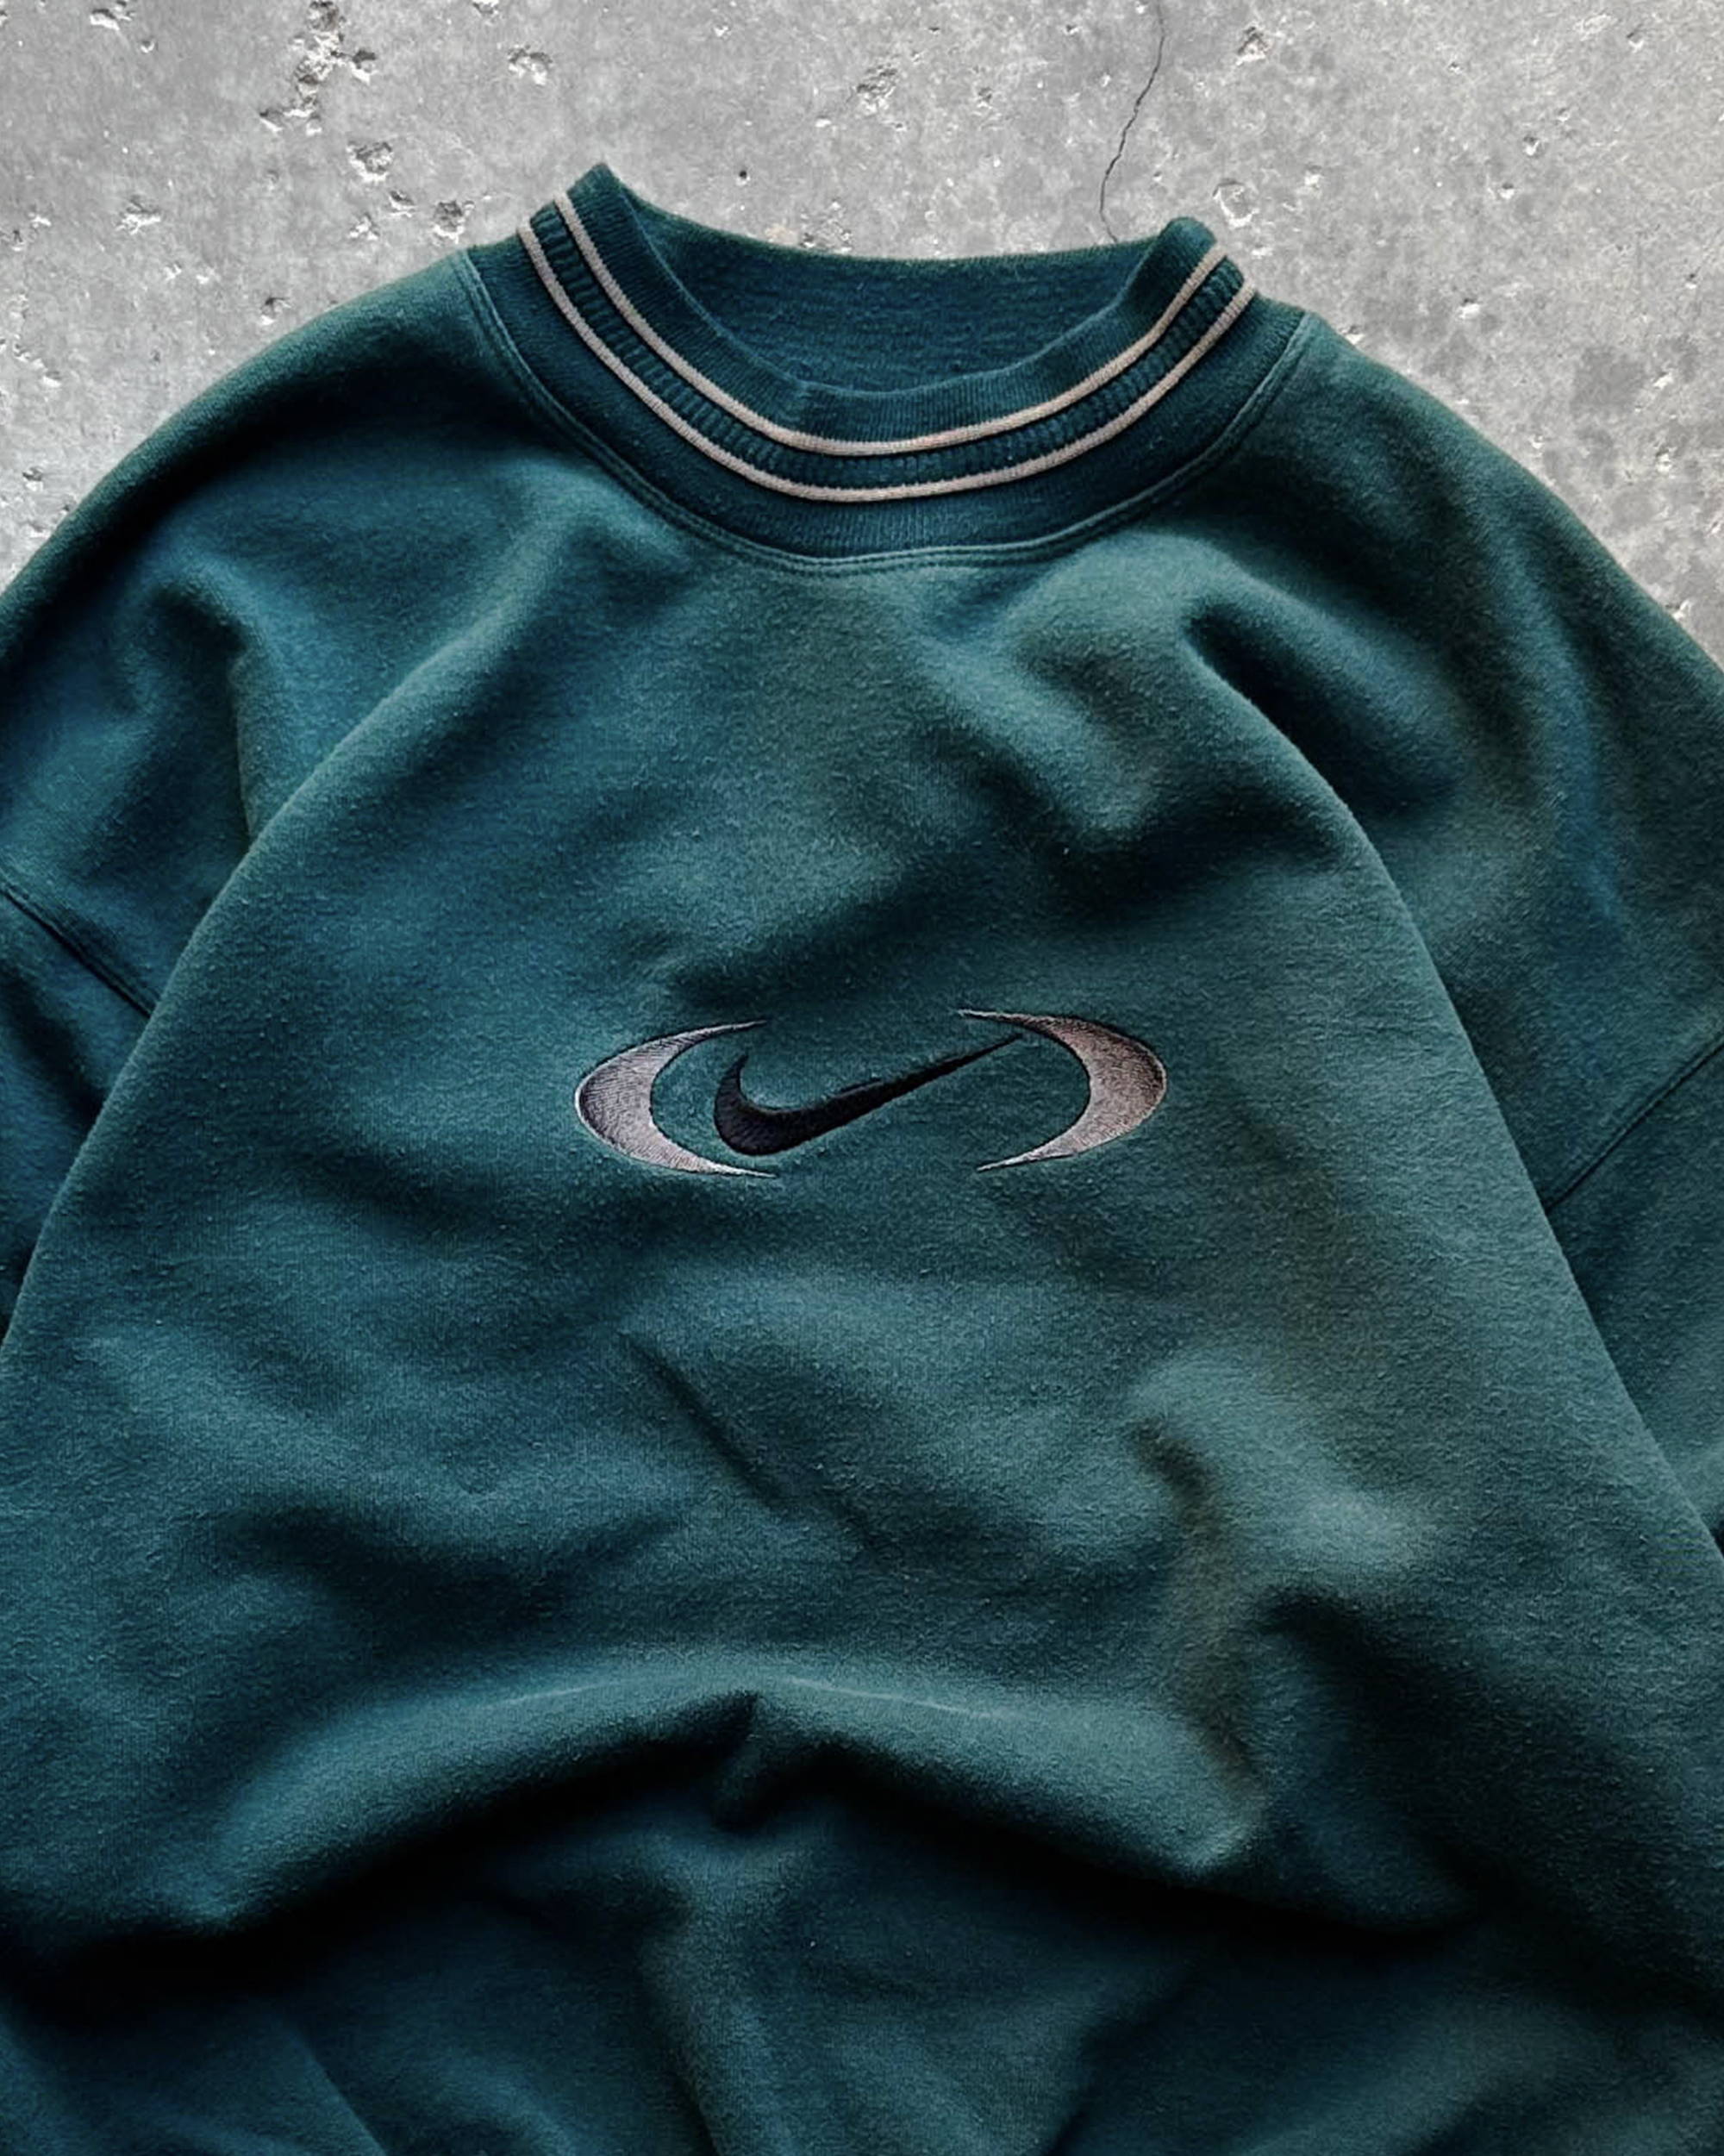 In Conversation w/ Nike Re-Creation and Defective Garments